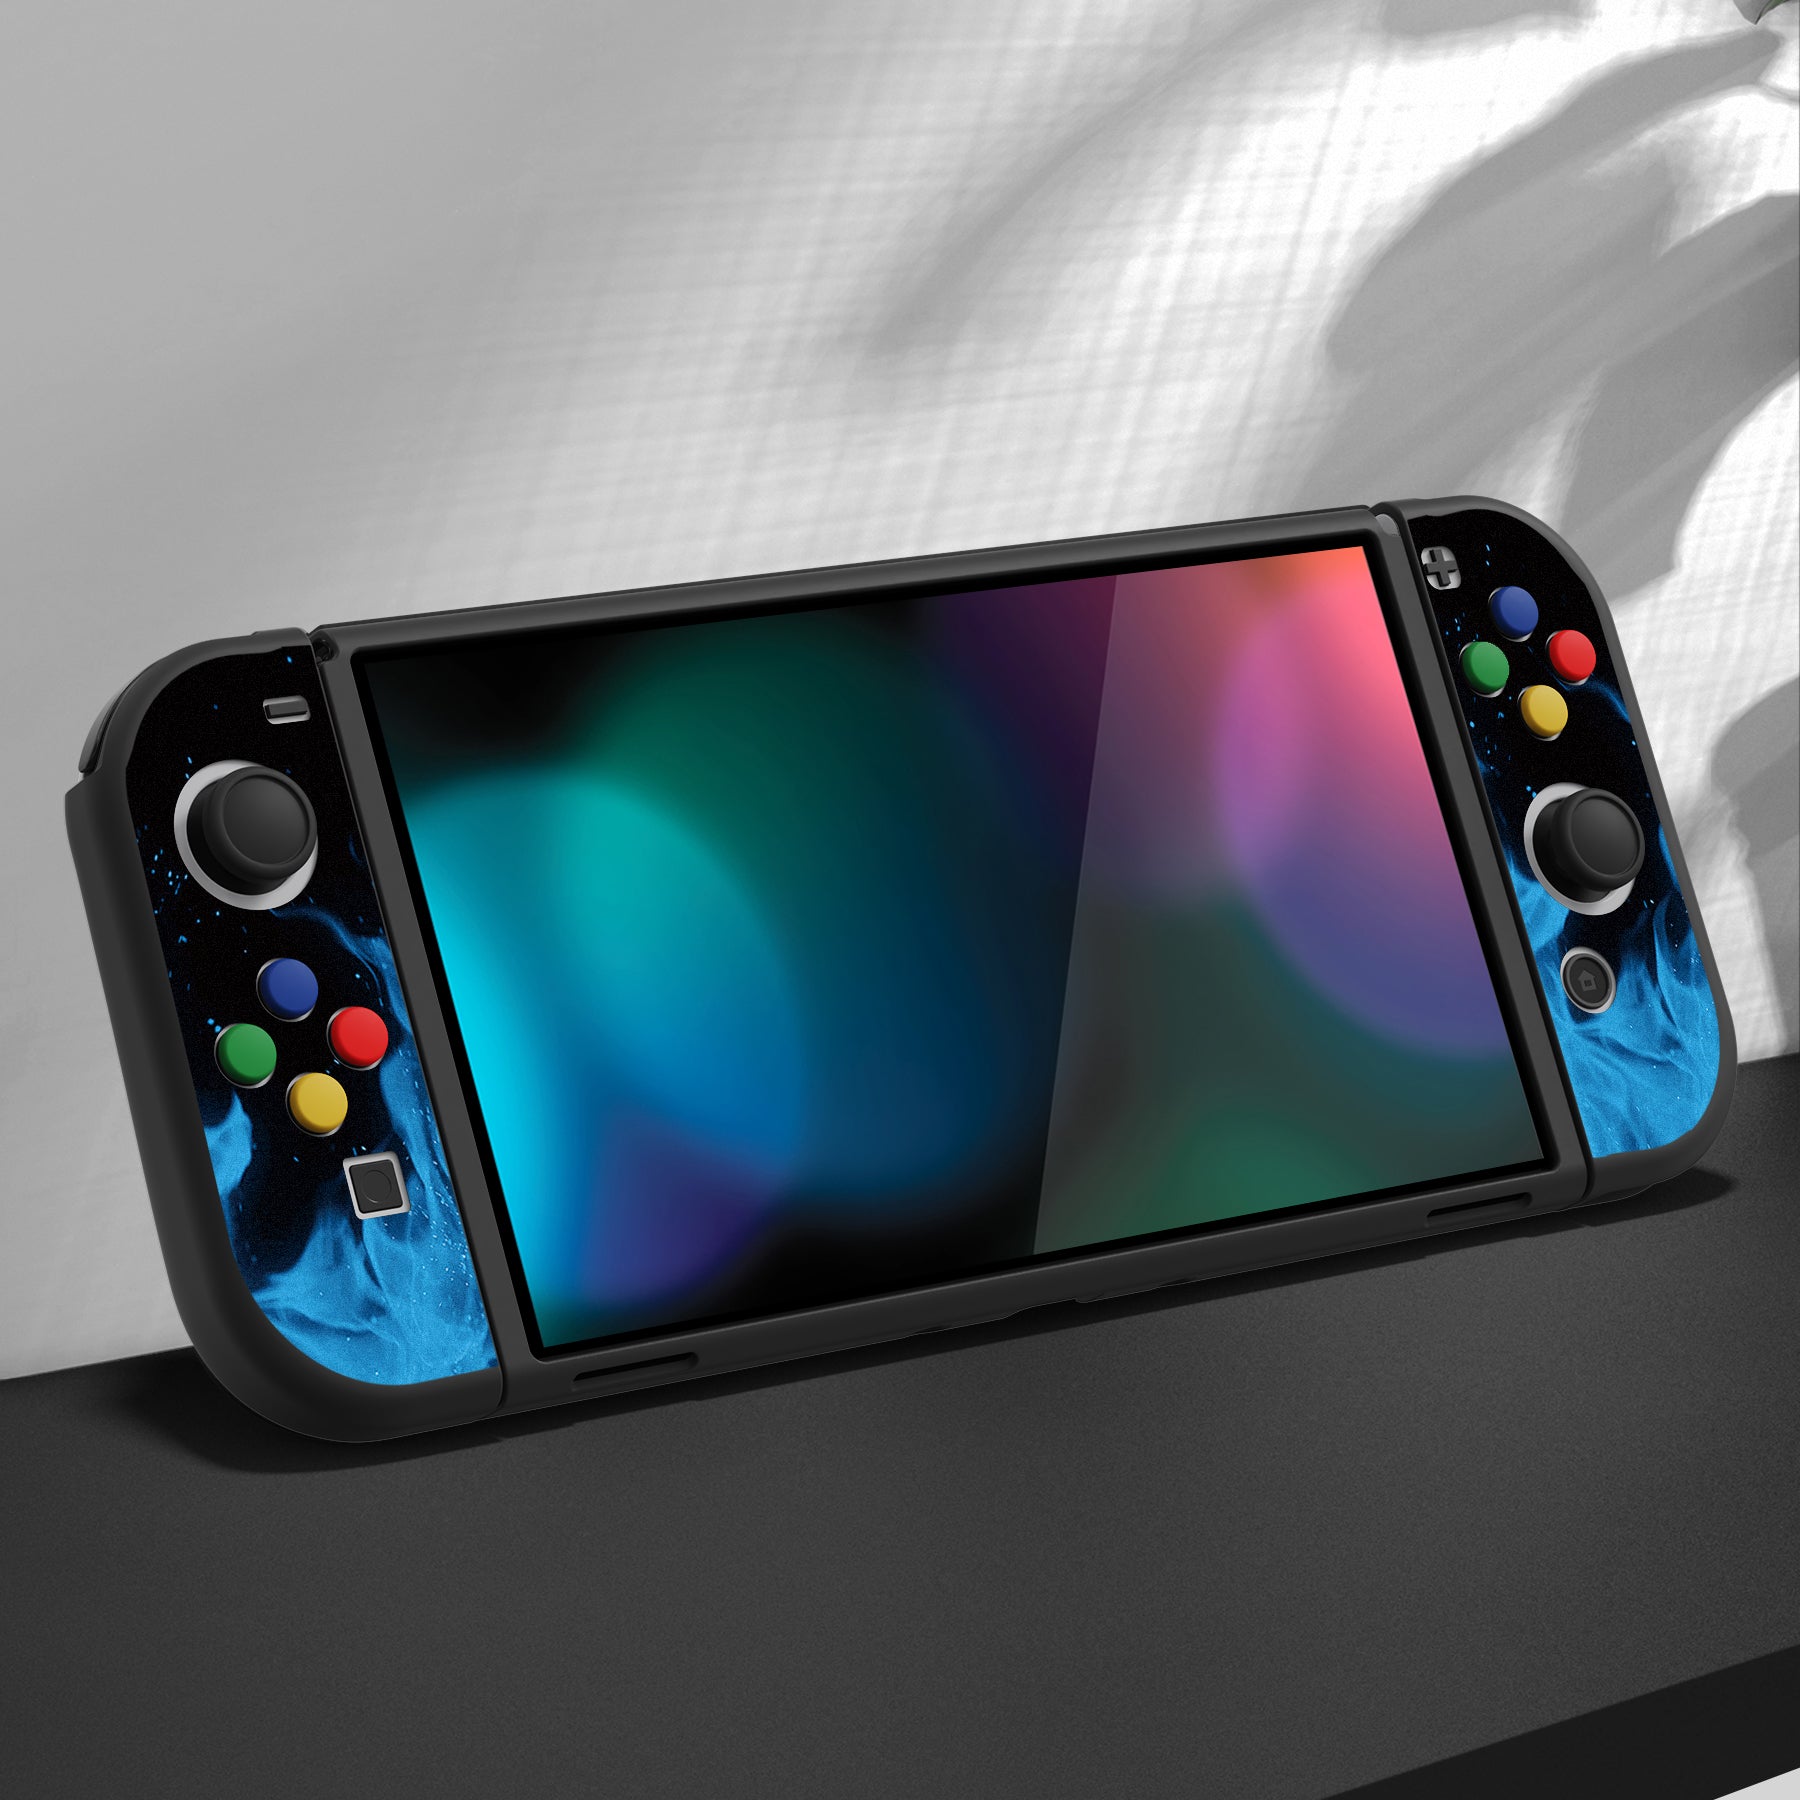 PlayVital ZealProtect Soft Protective Case for Switch OLED, Flexible Protector Joycon Grip Cover for Switch OLED with Thumb Grip Caps & ABXY Direction Button Caps - Blue Flame - XSOYV6003 playvital